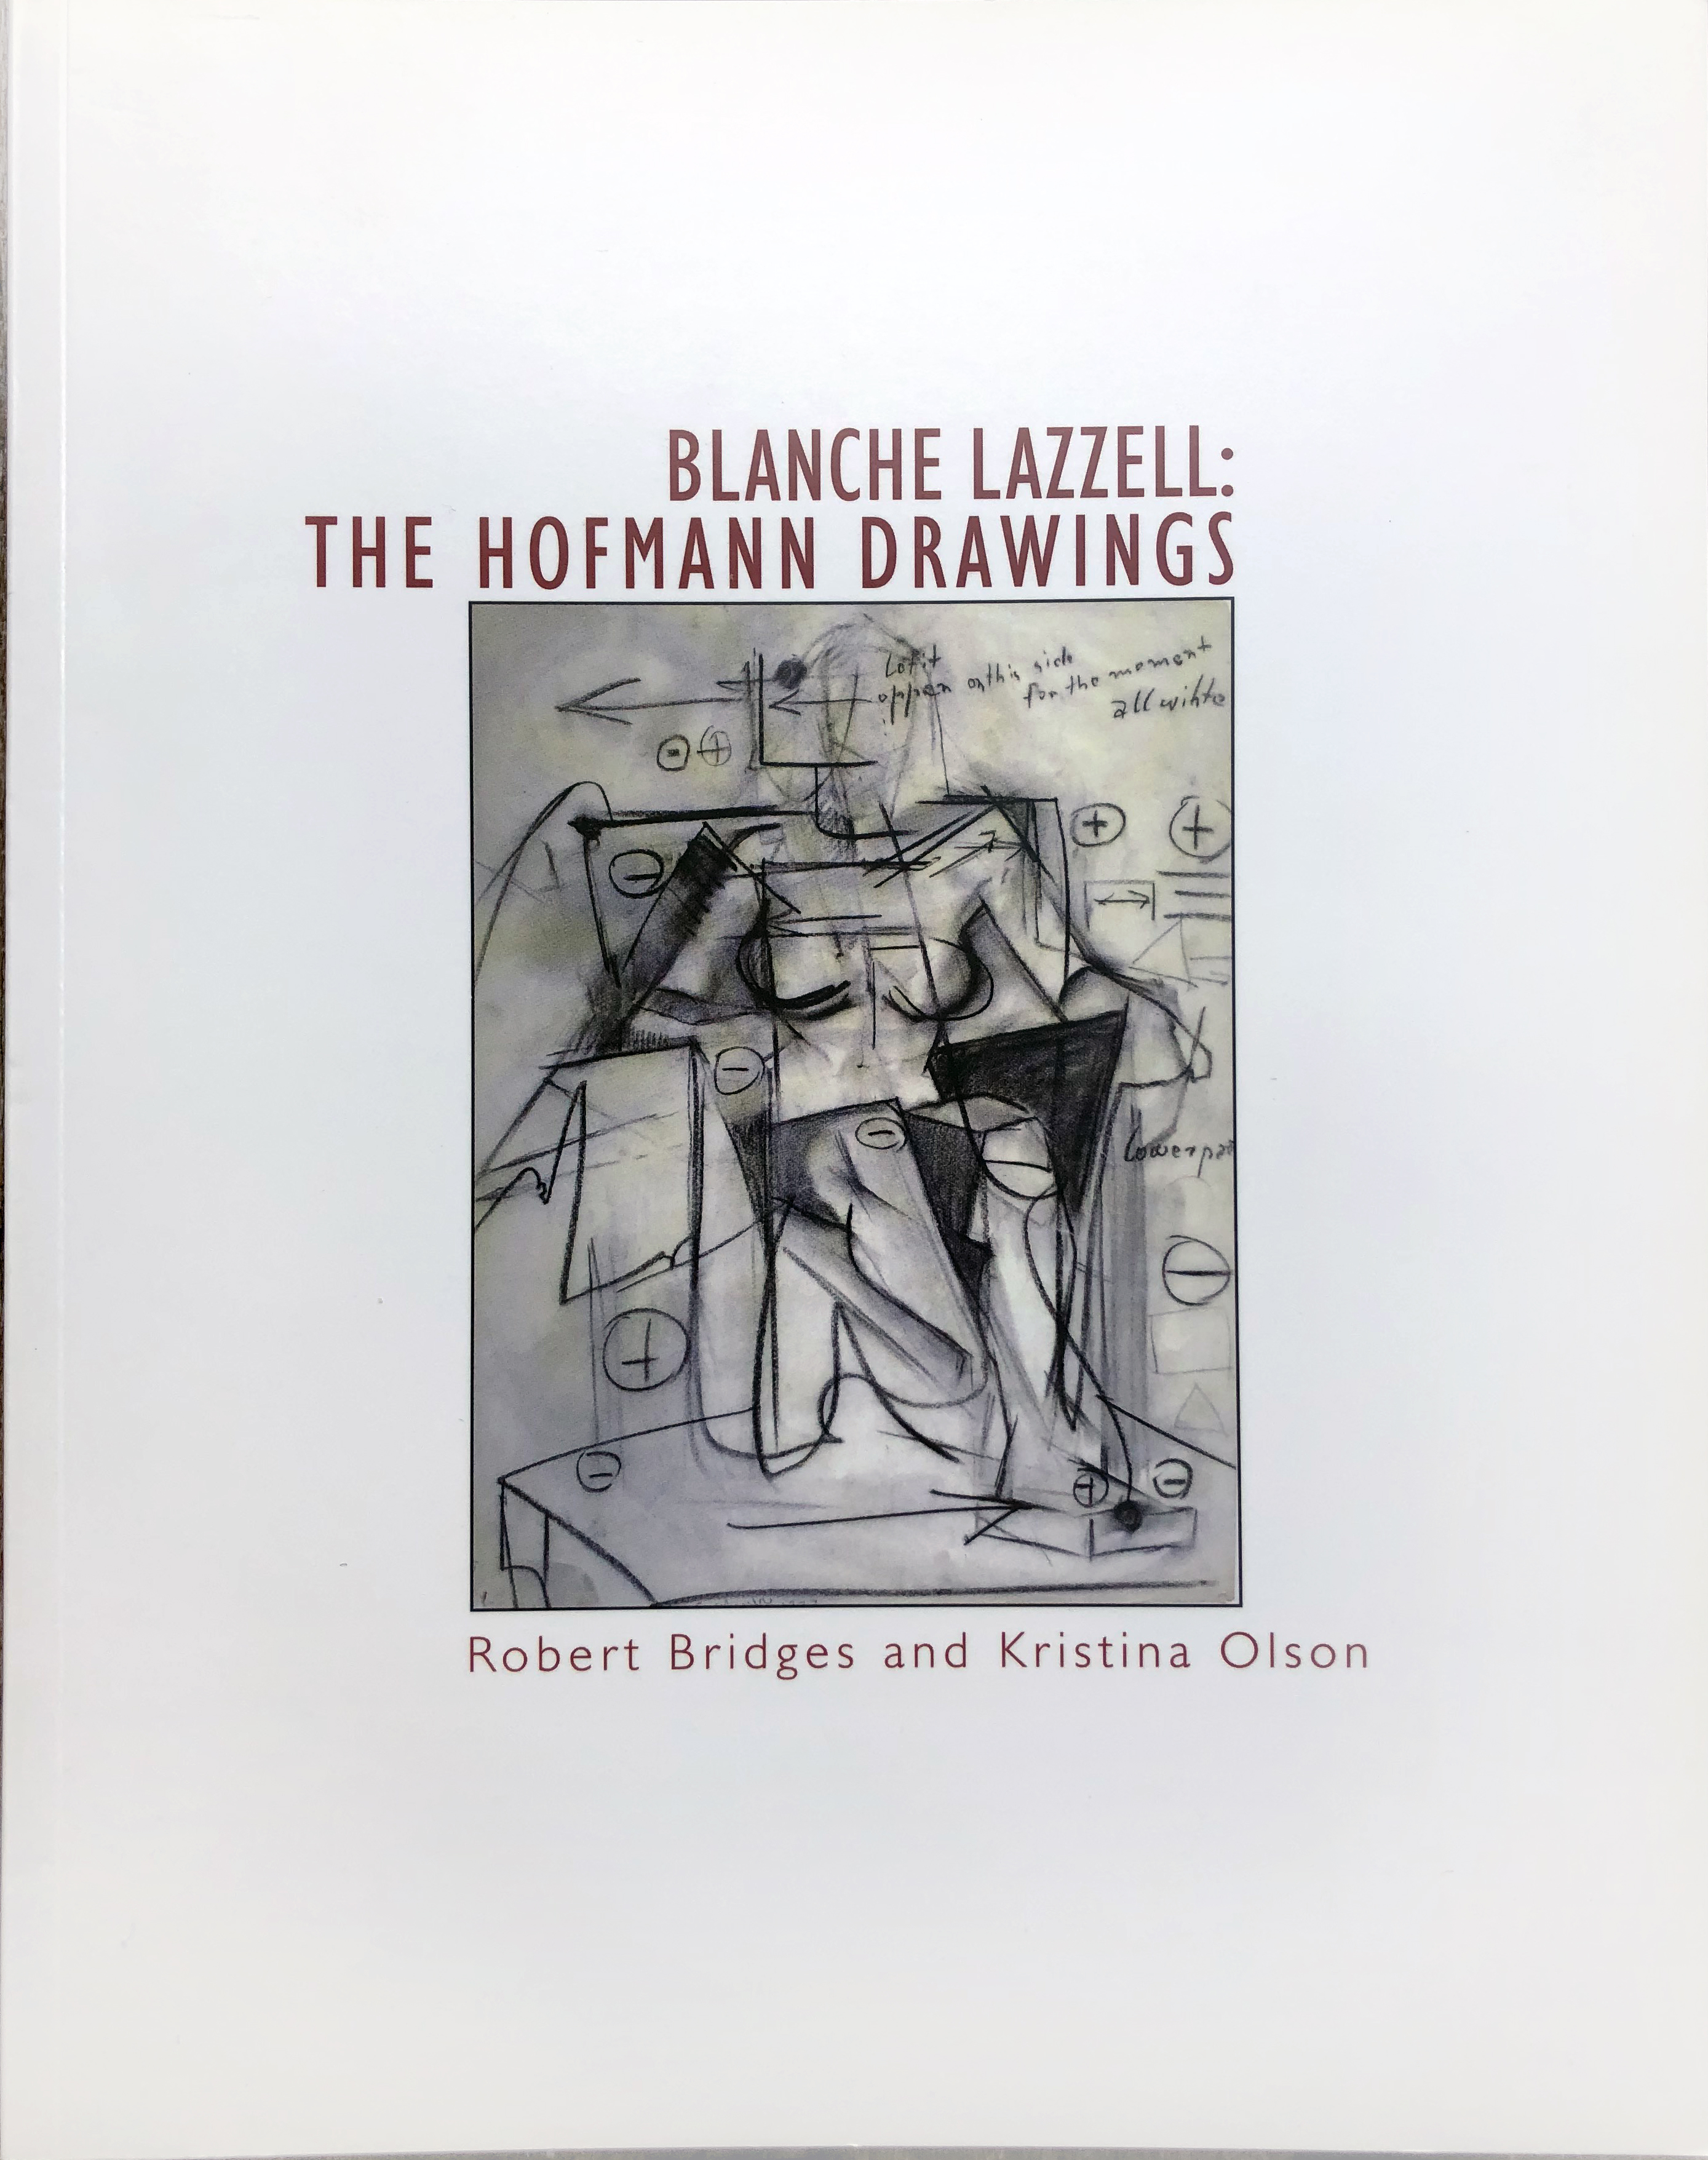 Blanche Lazzell: The Hofmann Drawings catalogue cover